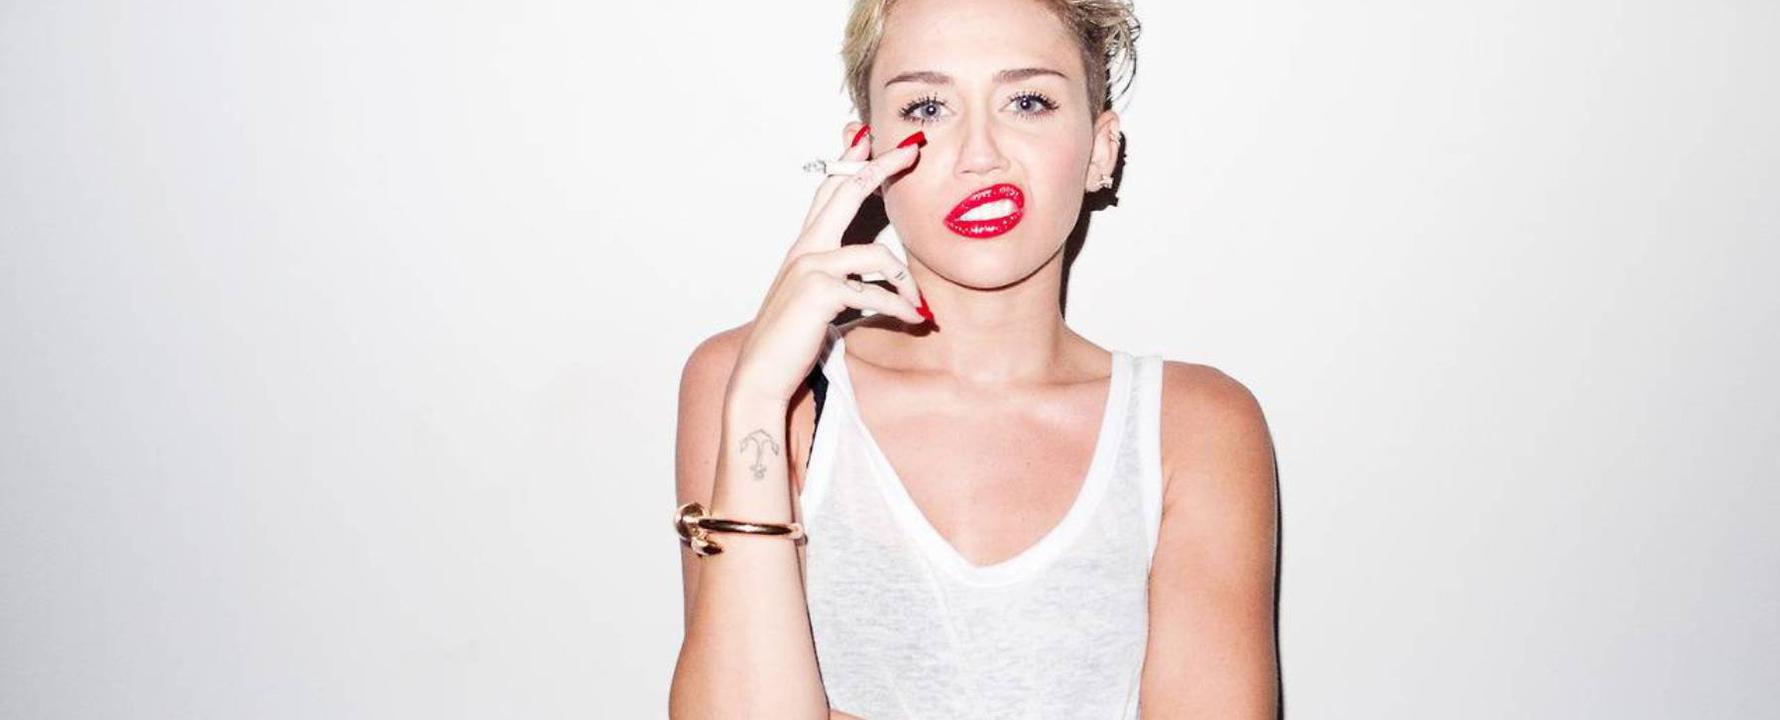 Promotional photograph of Miley Cyrus.